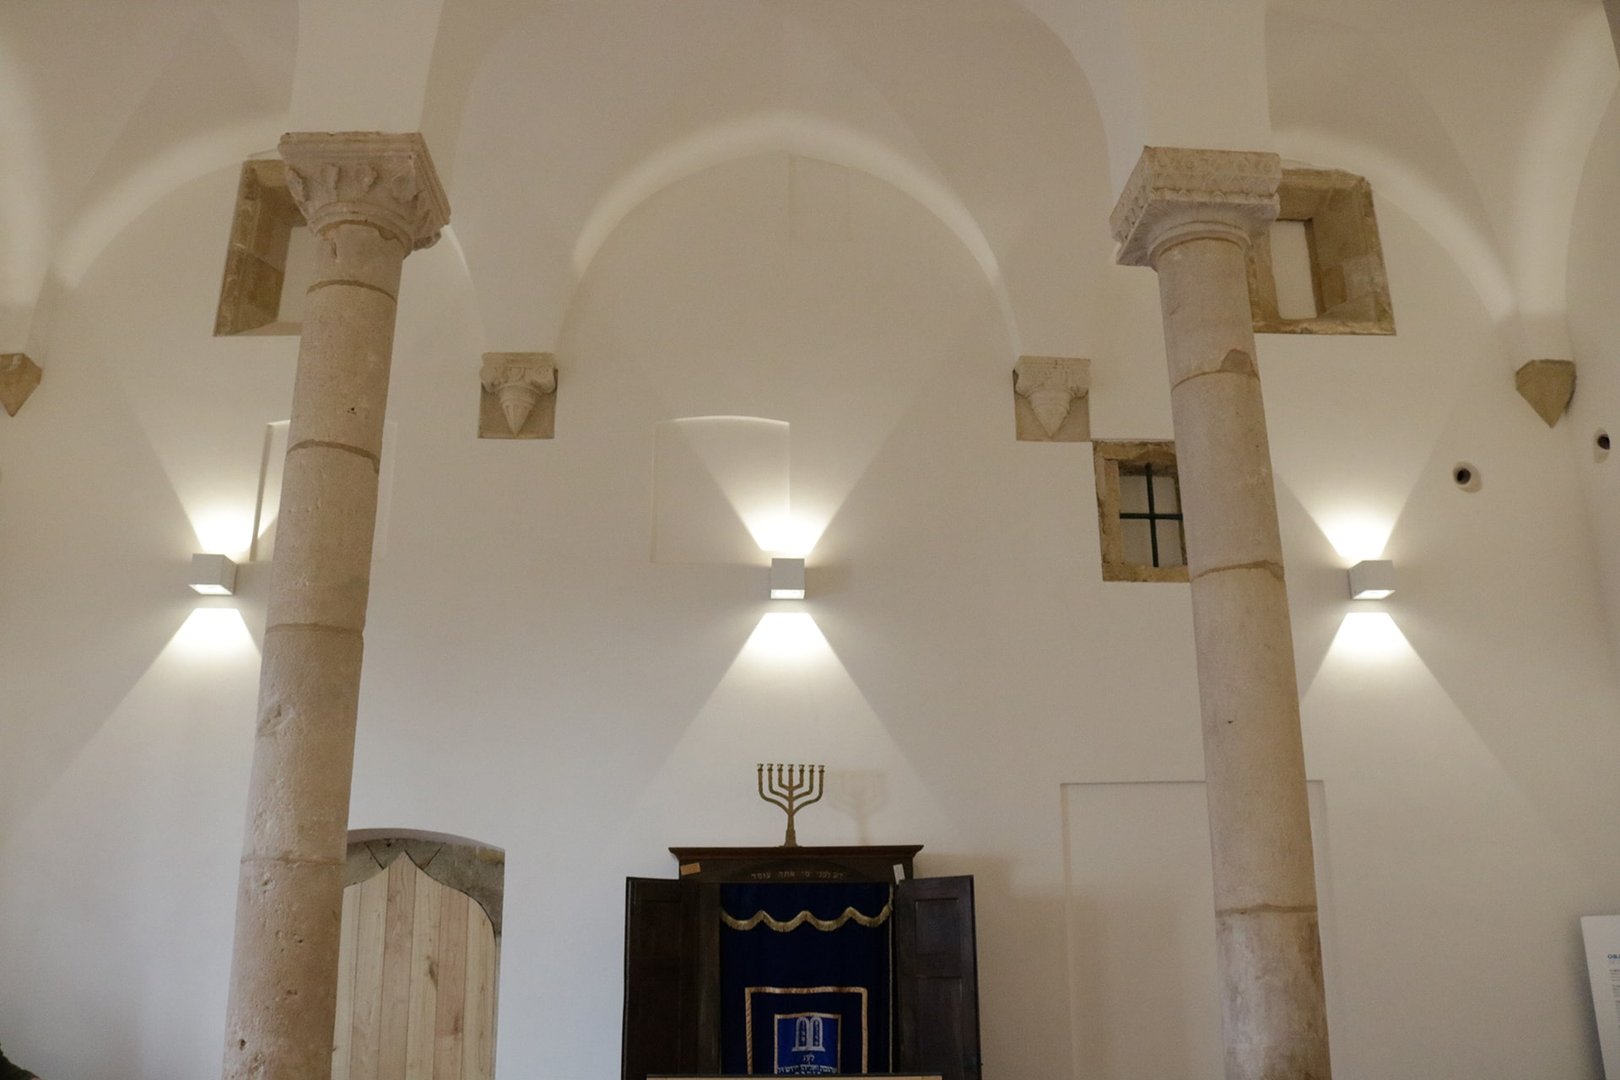 Since October 15, 2019 The Interpretation Centre of the Tomar Synagogue is located here.